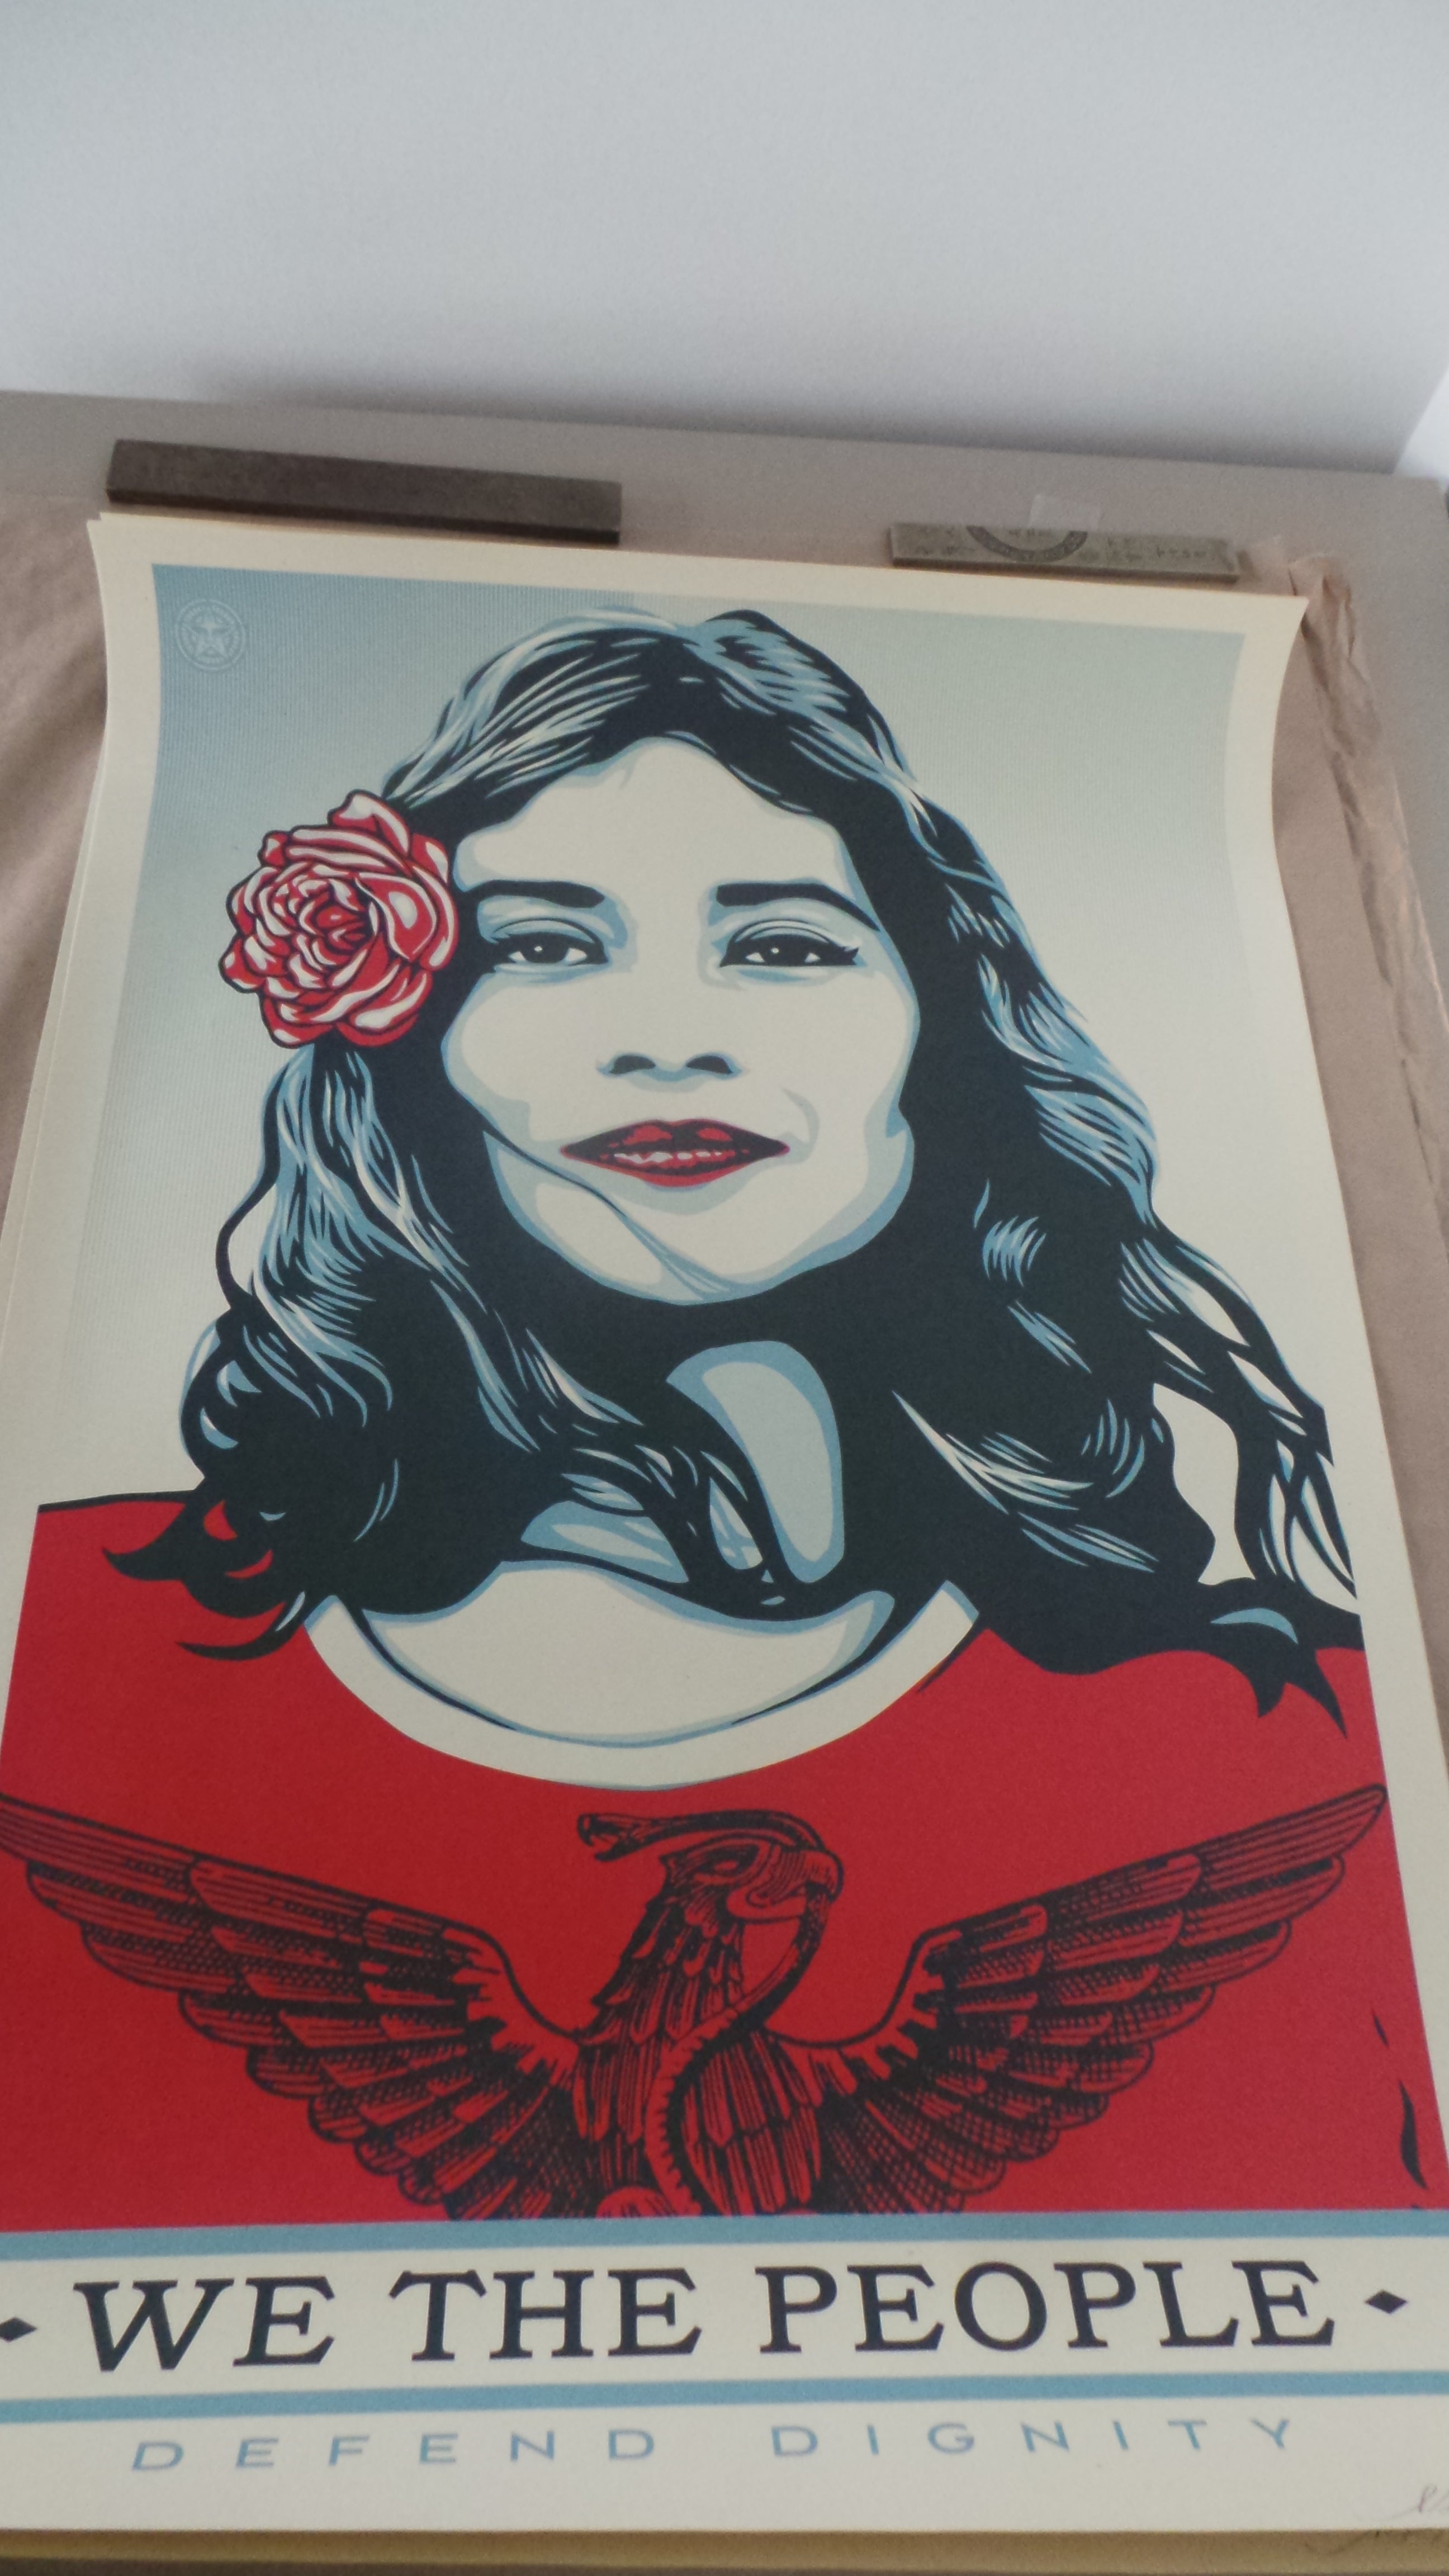 This listing is for the highly coveted Shepard Fairey "Defend Dignity", "Greater than Fear" and "Protect Each Other" set lithographs from the We The People series by the Amplifier Foundation.  These lithographs are SIGNED but UNNUMBERED  Prints are stored flat in very good condition. Following purchase, prints are rolled in archival paper and shipped with bubble wrap in sturdy cardboard tubes.